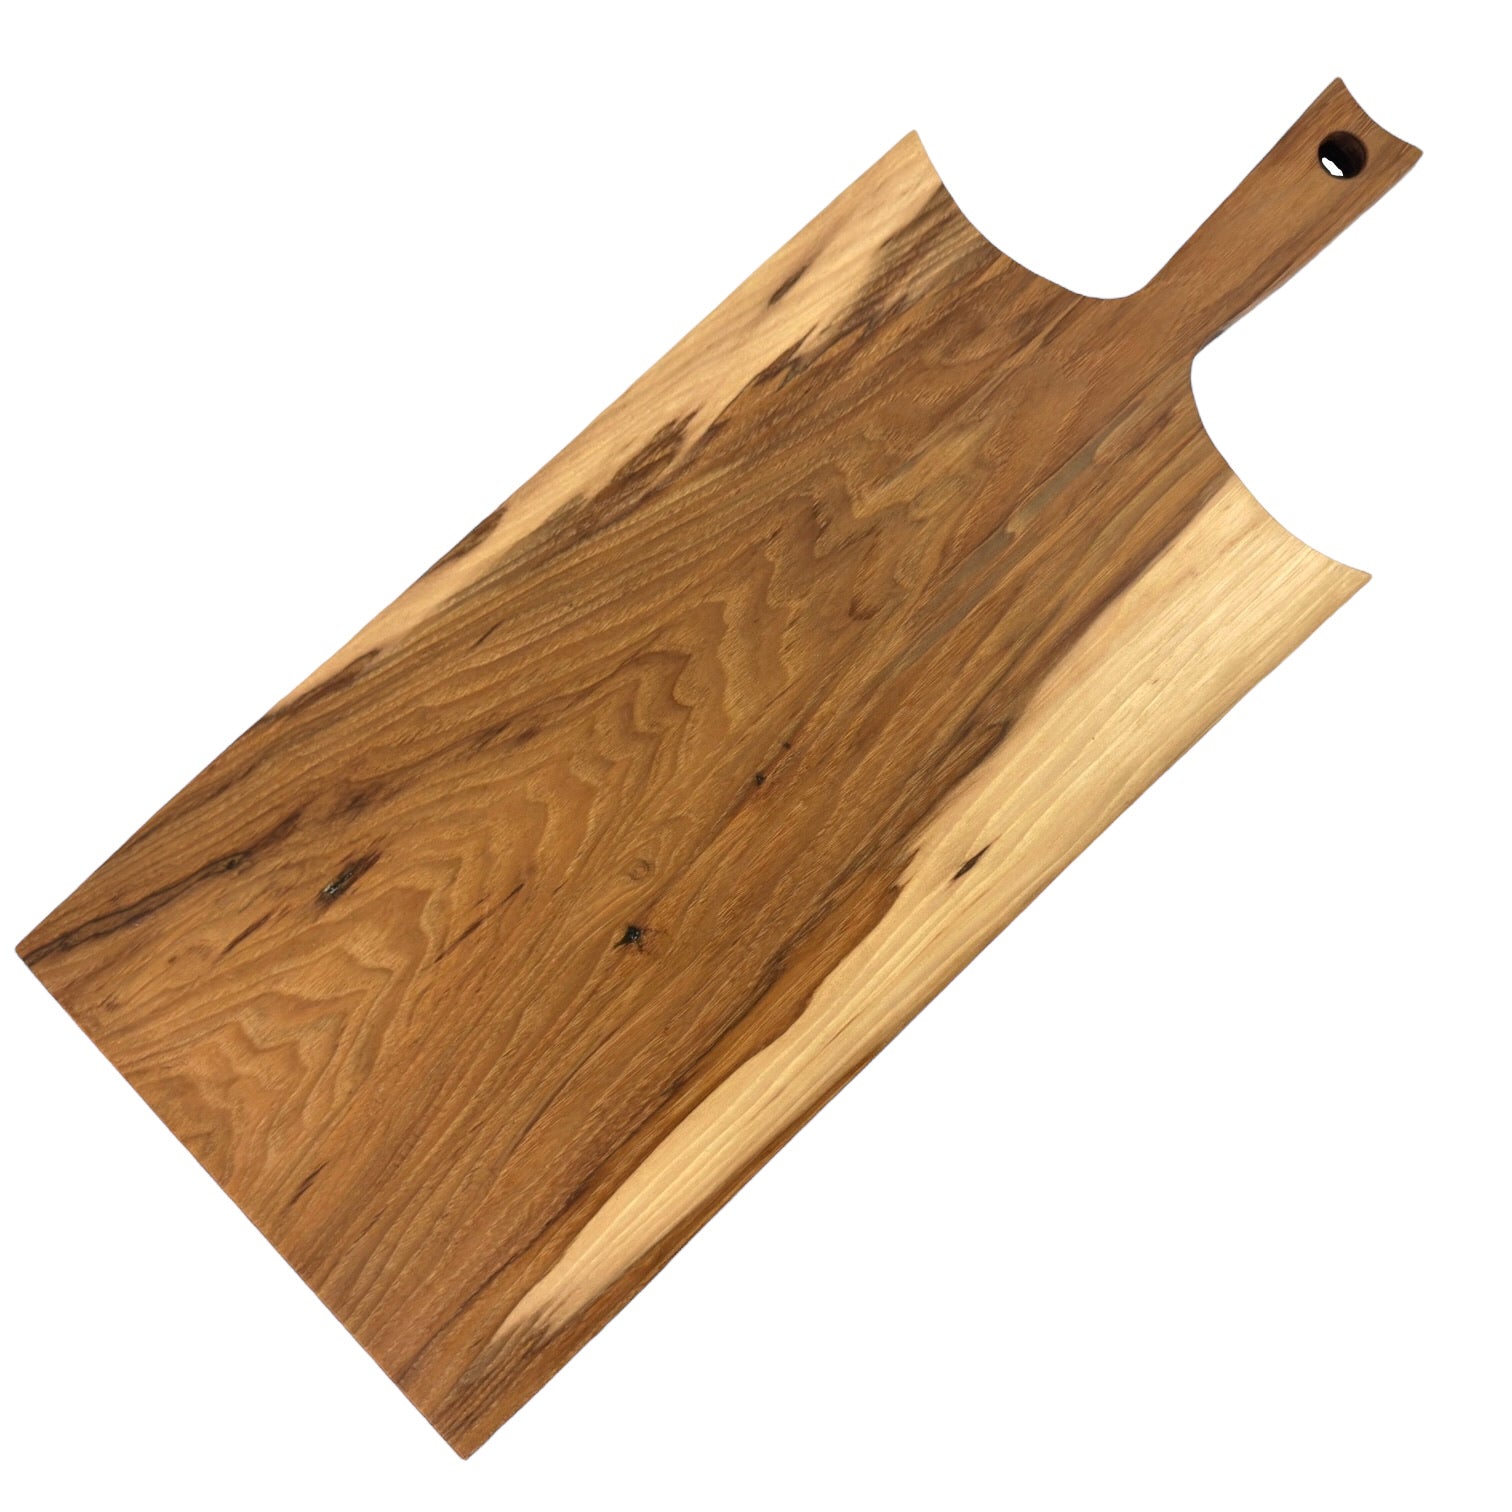 Rustic Handmade Wooden Charcuterie Boards - RTS hickory bottom view